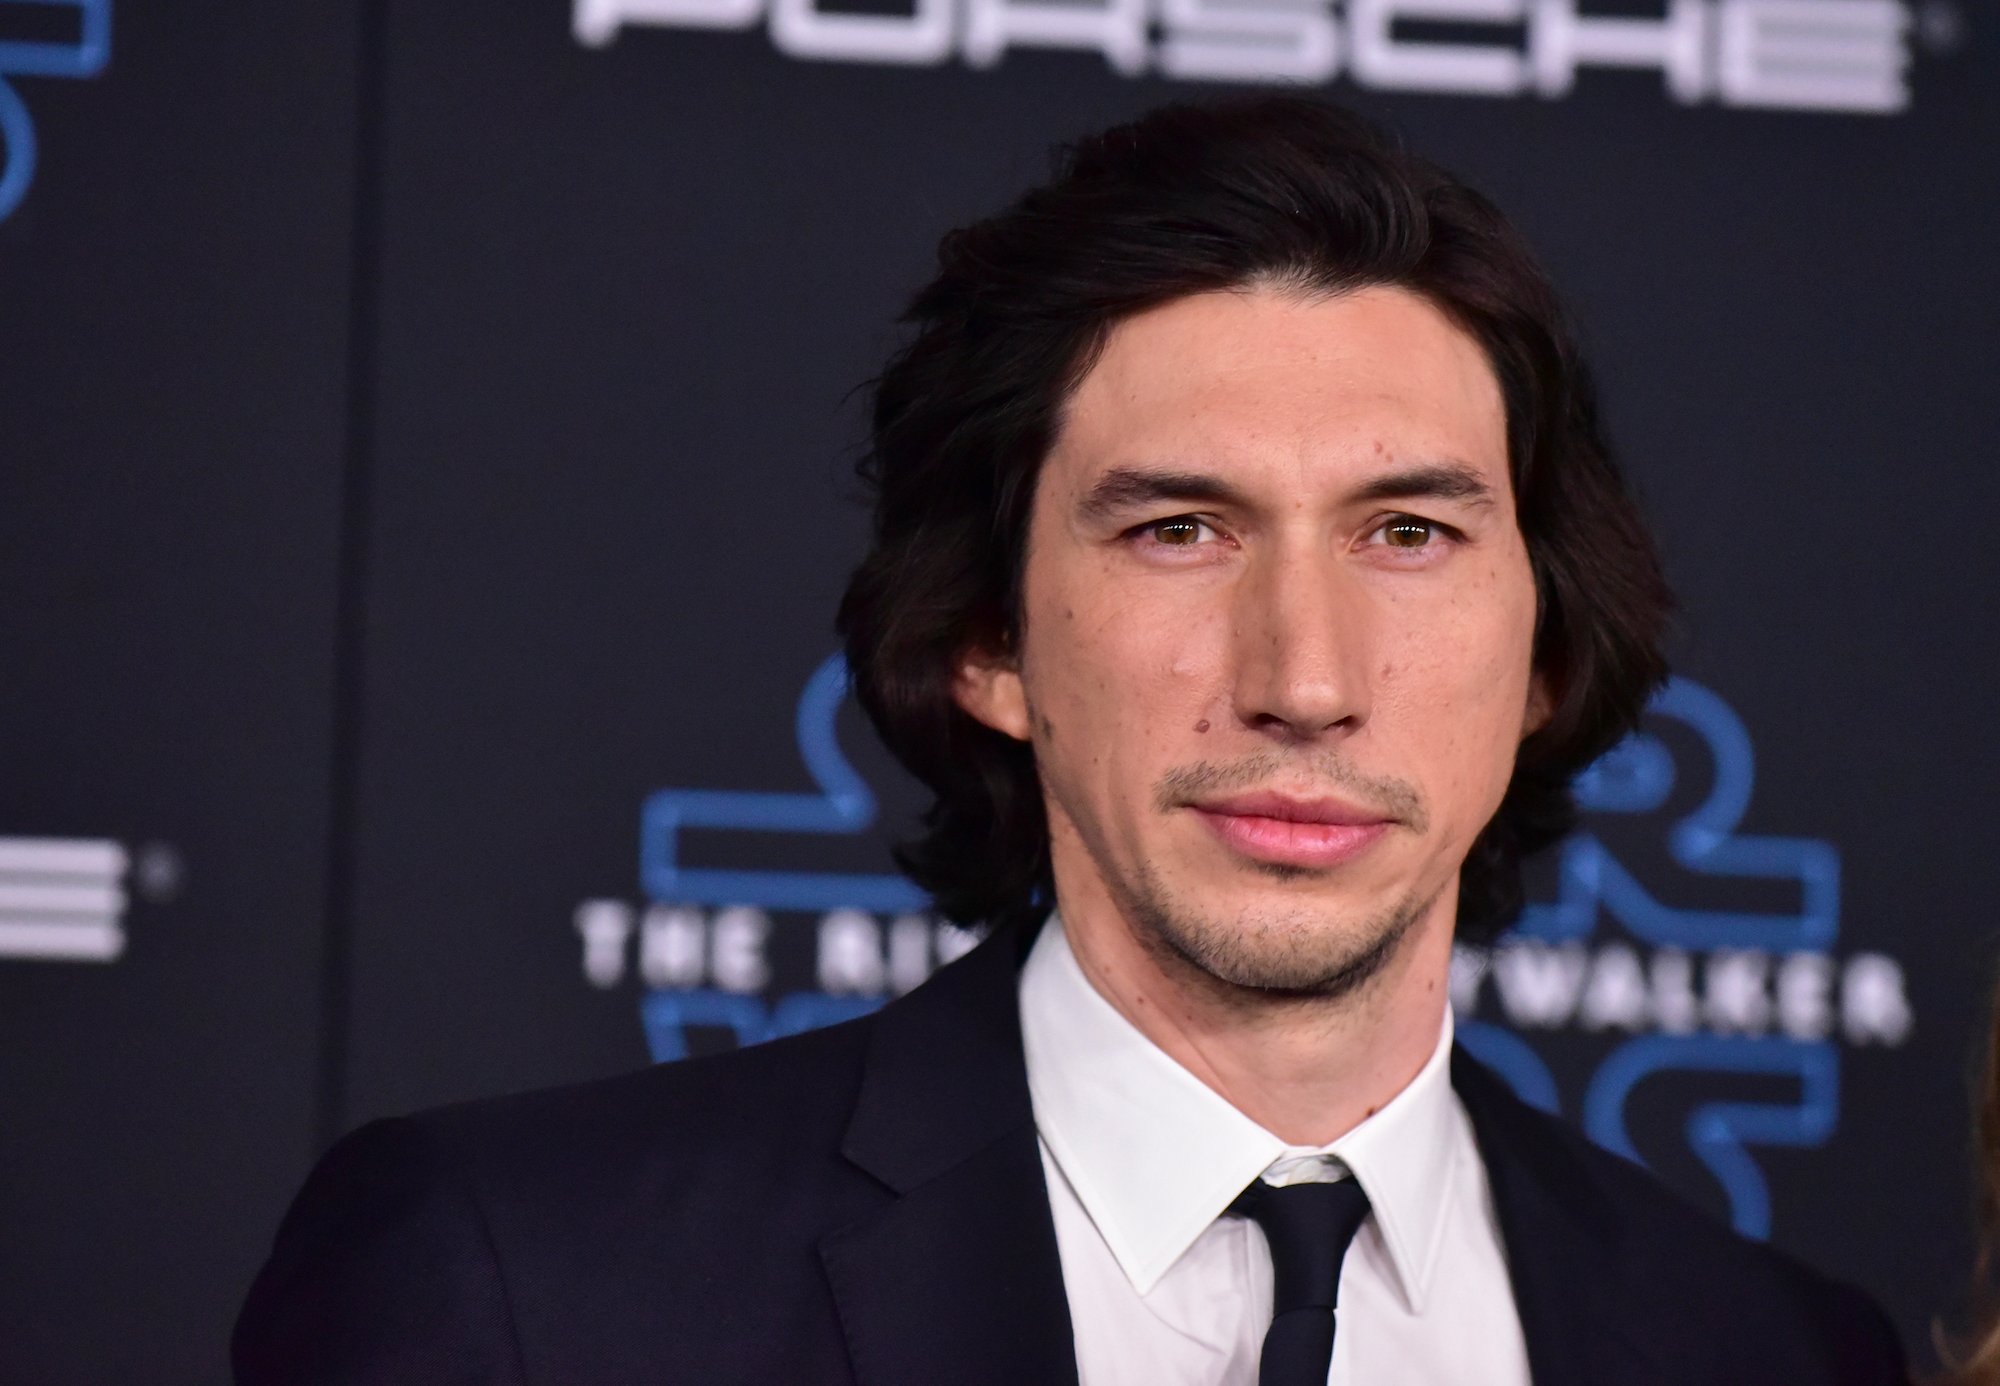 Adam Driver on the red carpet